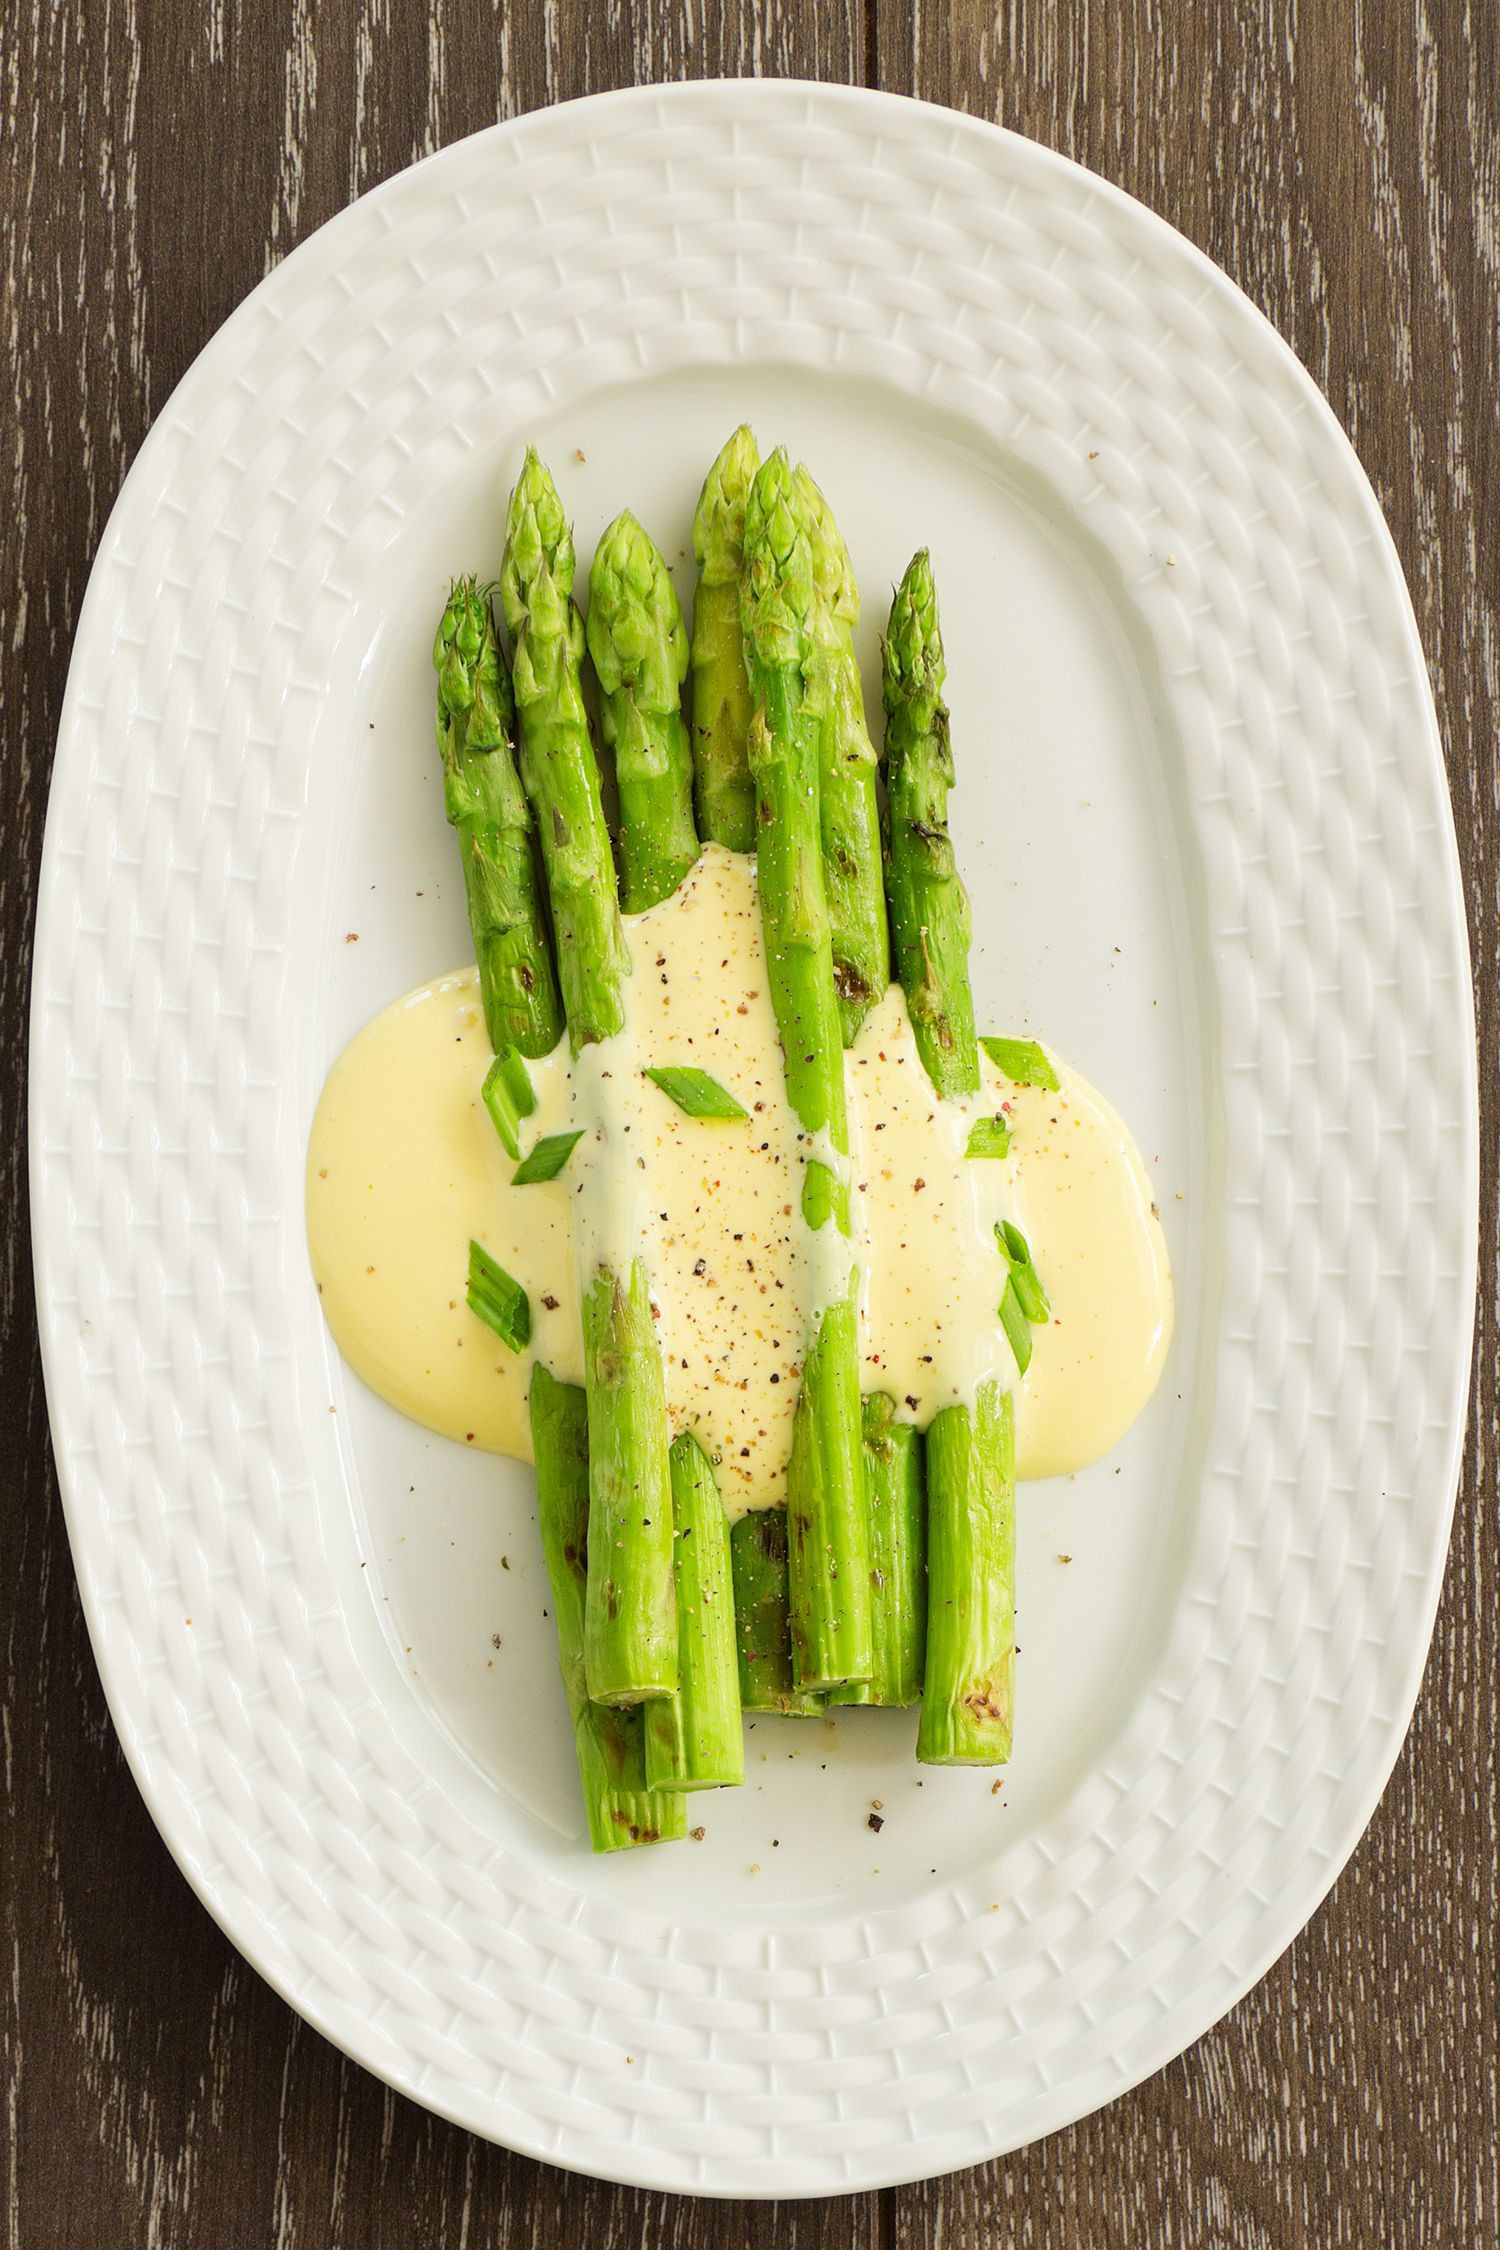 Vegetable Side Dishes For Easter Dinner
 These Easter Side Dishes Are Bound to Upstage Your Ham